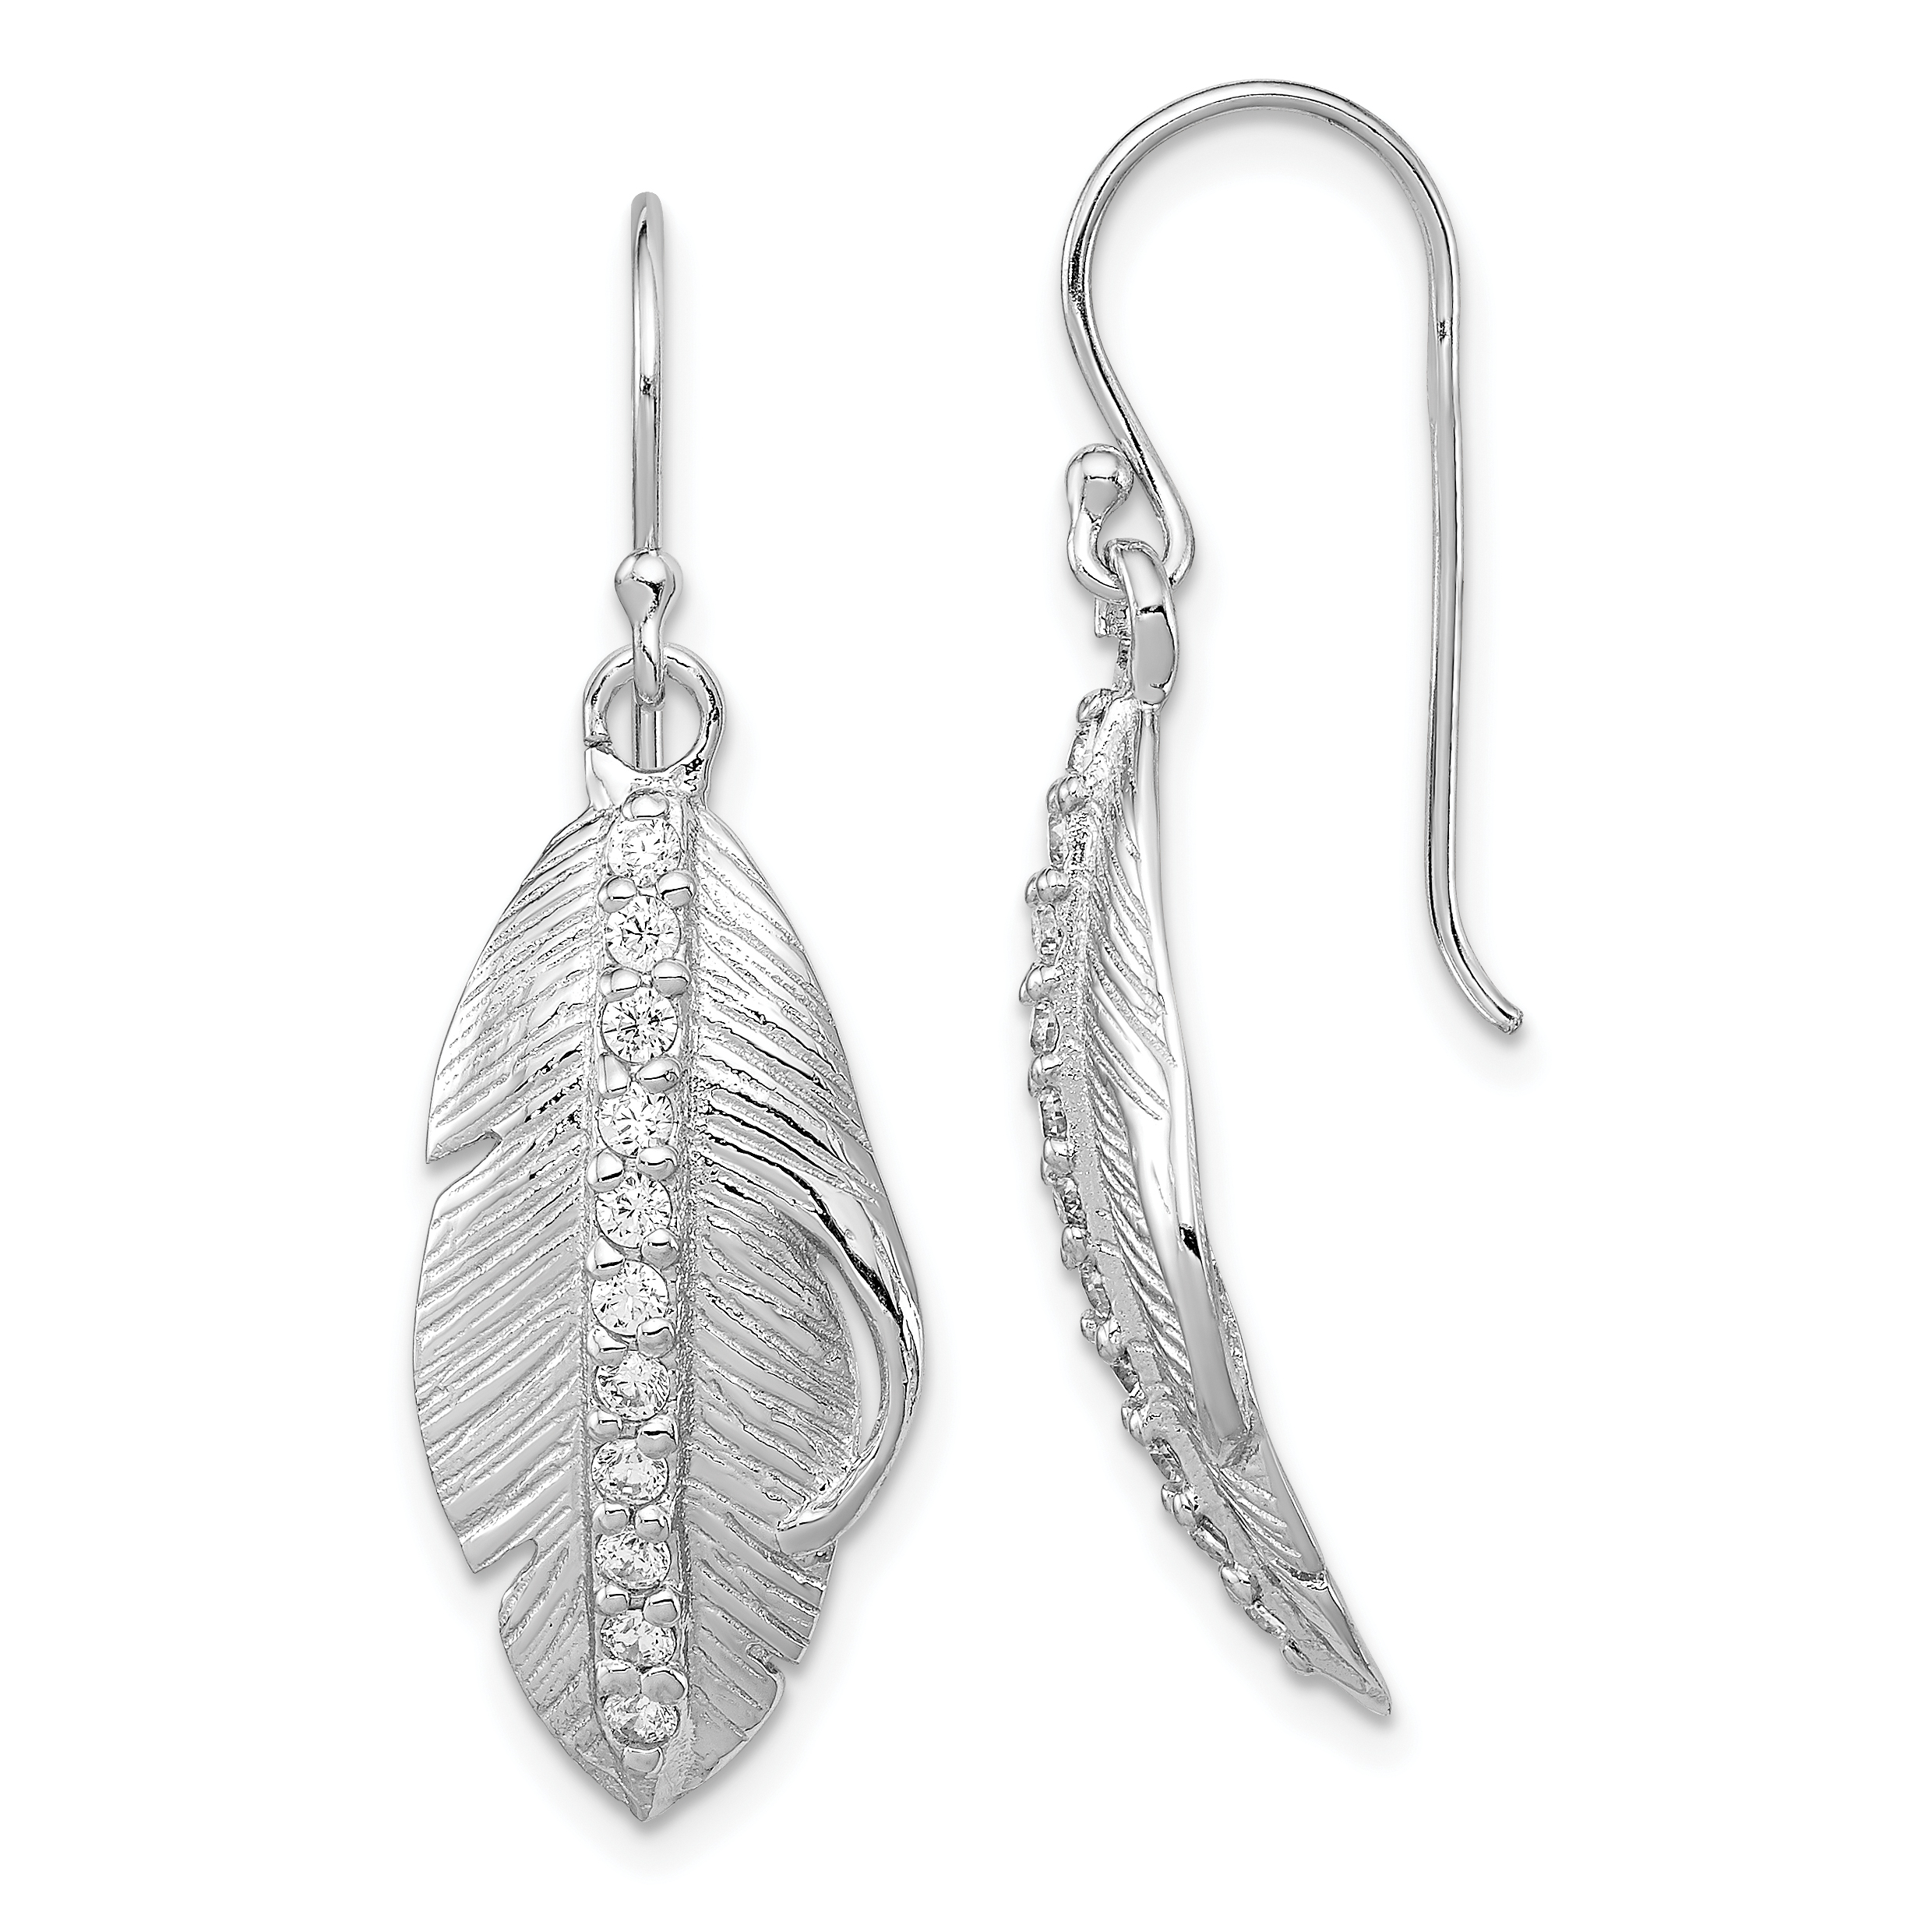 925 Sterling Silver Cubic Zirconia Cz Textured Feather Shepherd Hook Drop Dangle Chandelier Earrings Outdoor Nature Fine Jewelry For Women Gifts For Her - image 1 of 6